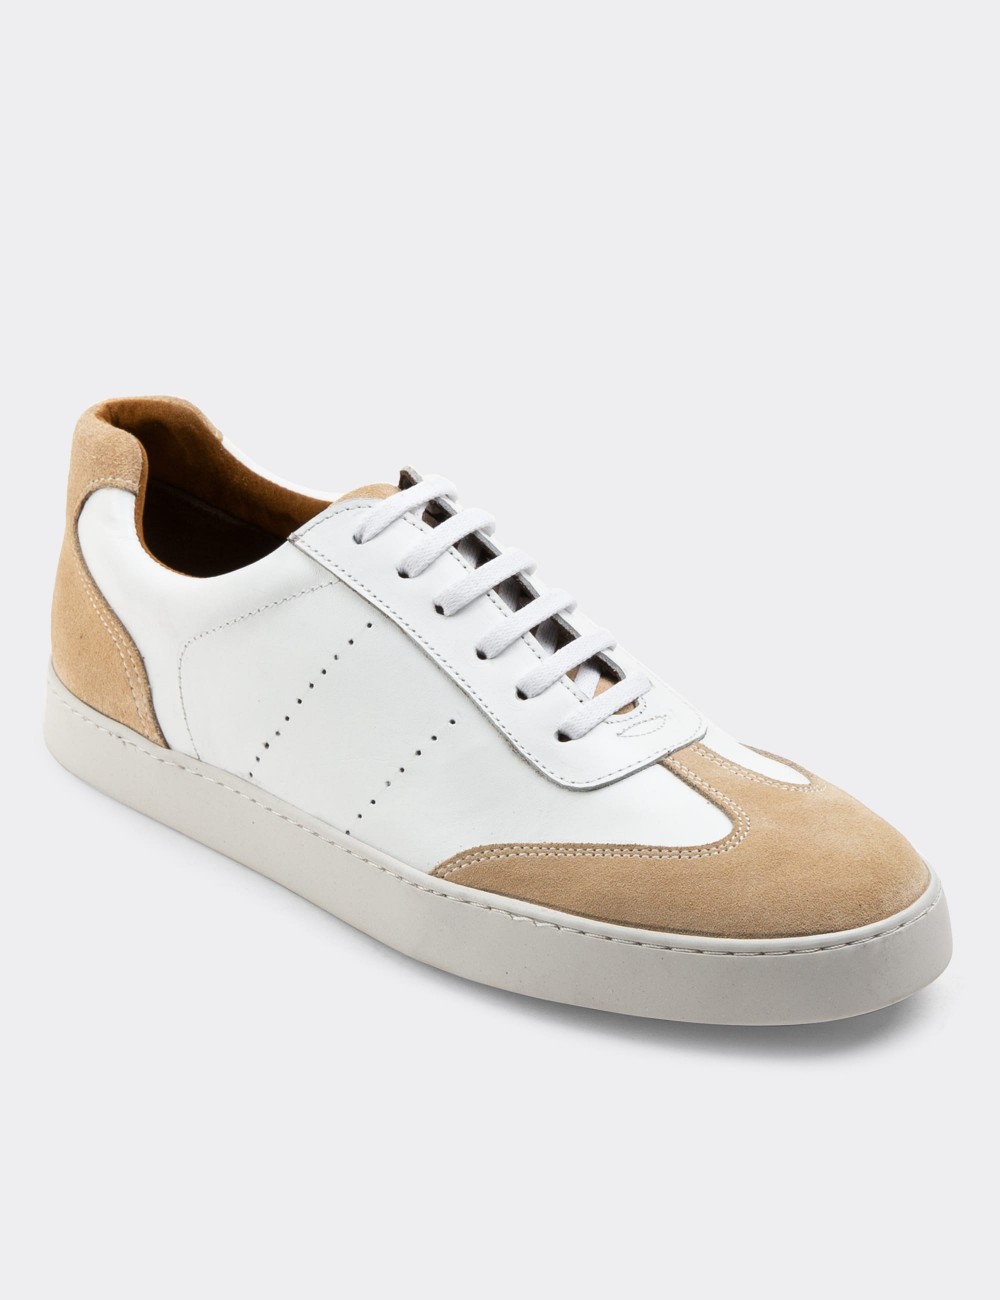 Beige  Leather Sneakers - 01881MBEJC01